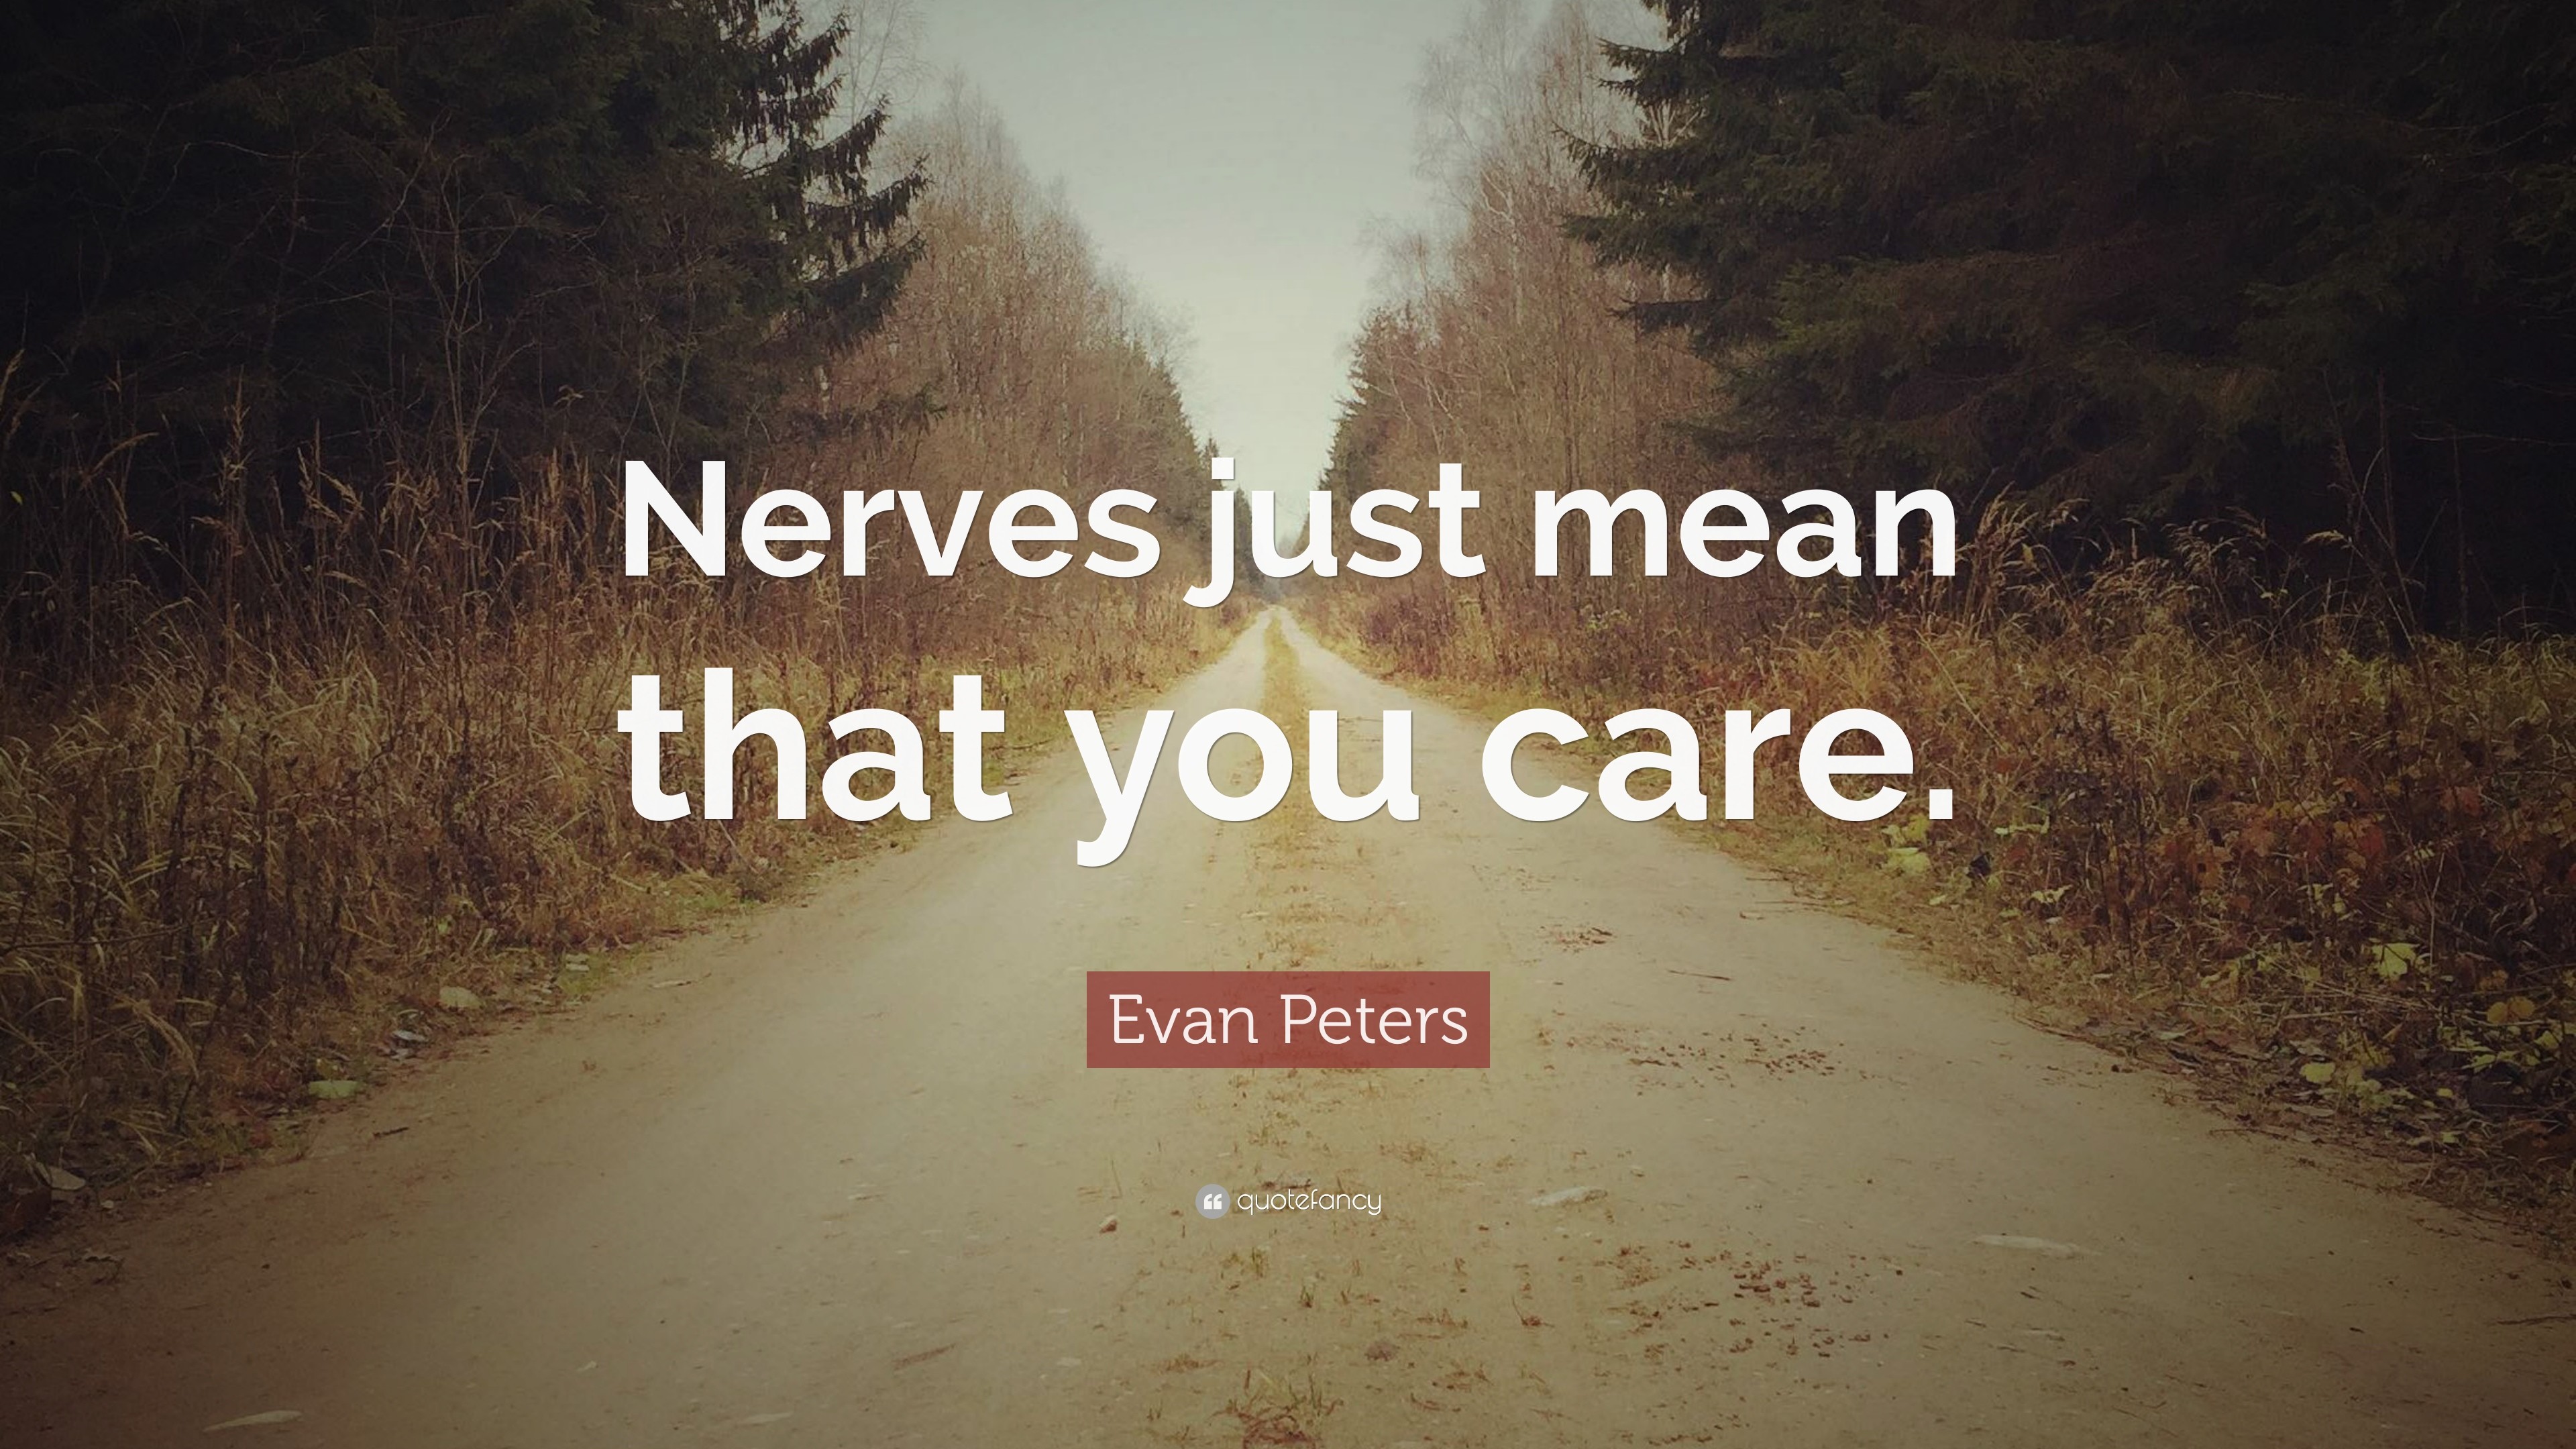 3840x2160 Evan Peters Quote: “Nerves just mean that you care.”